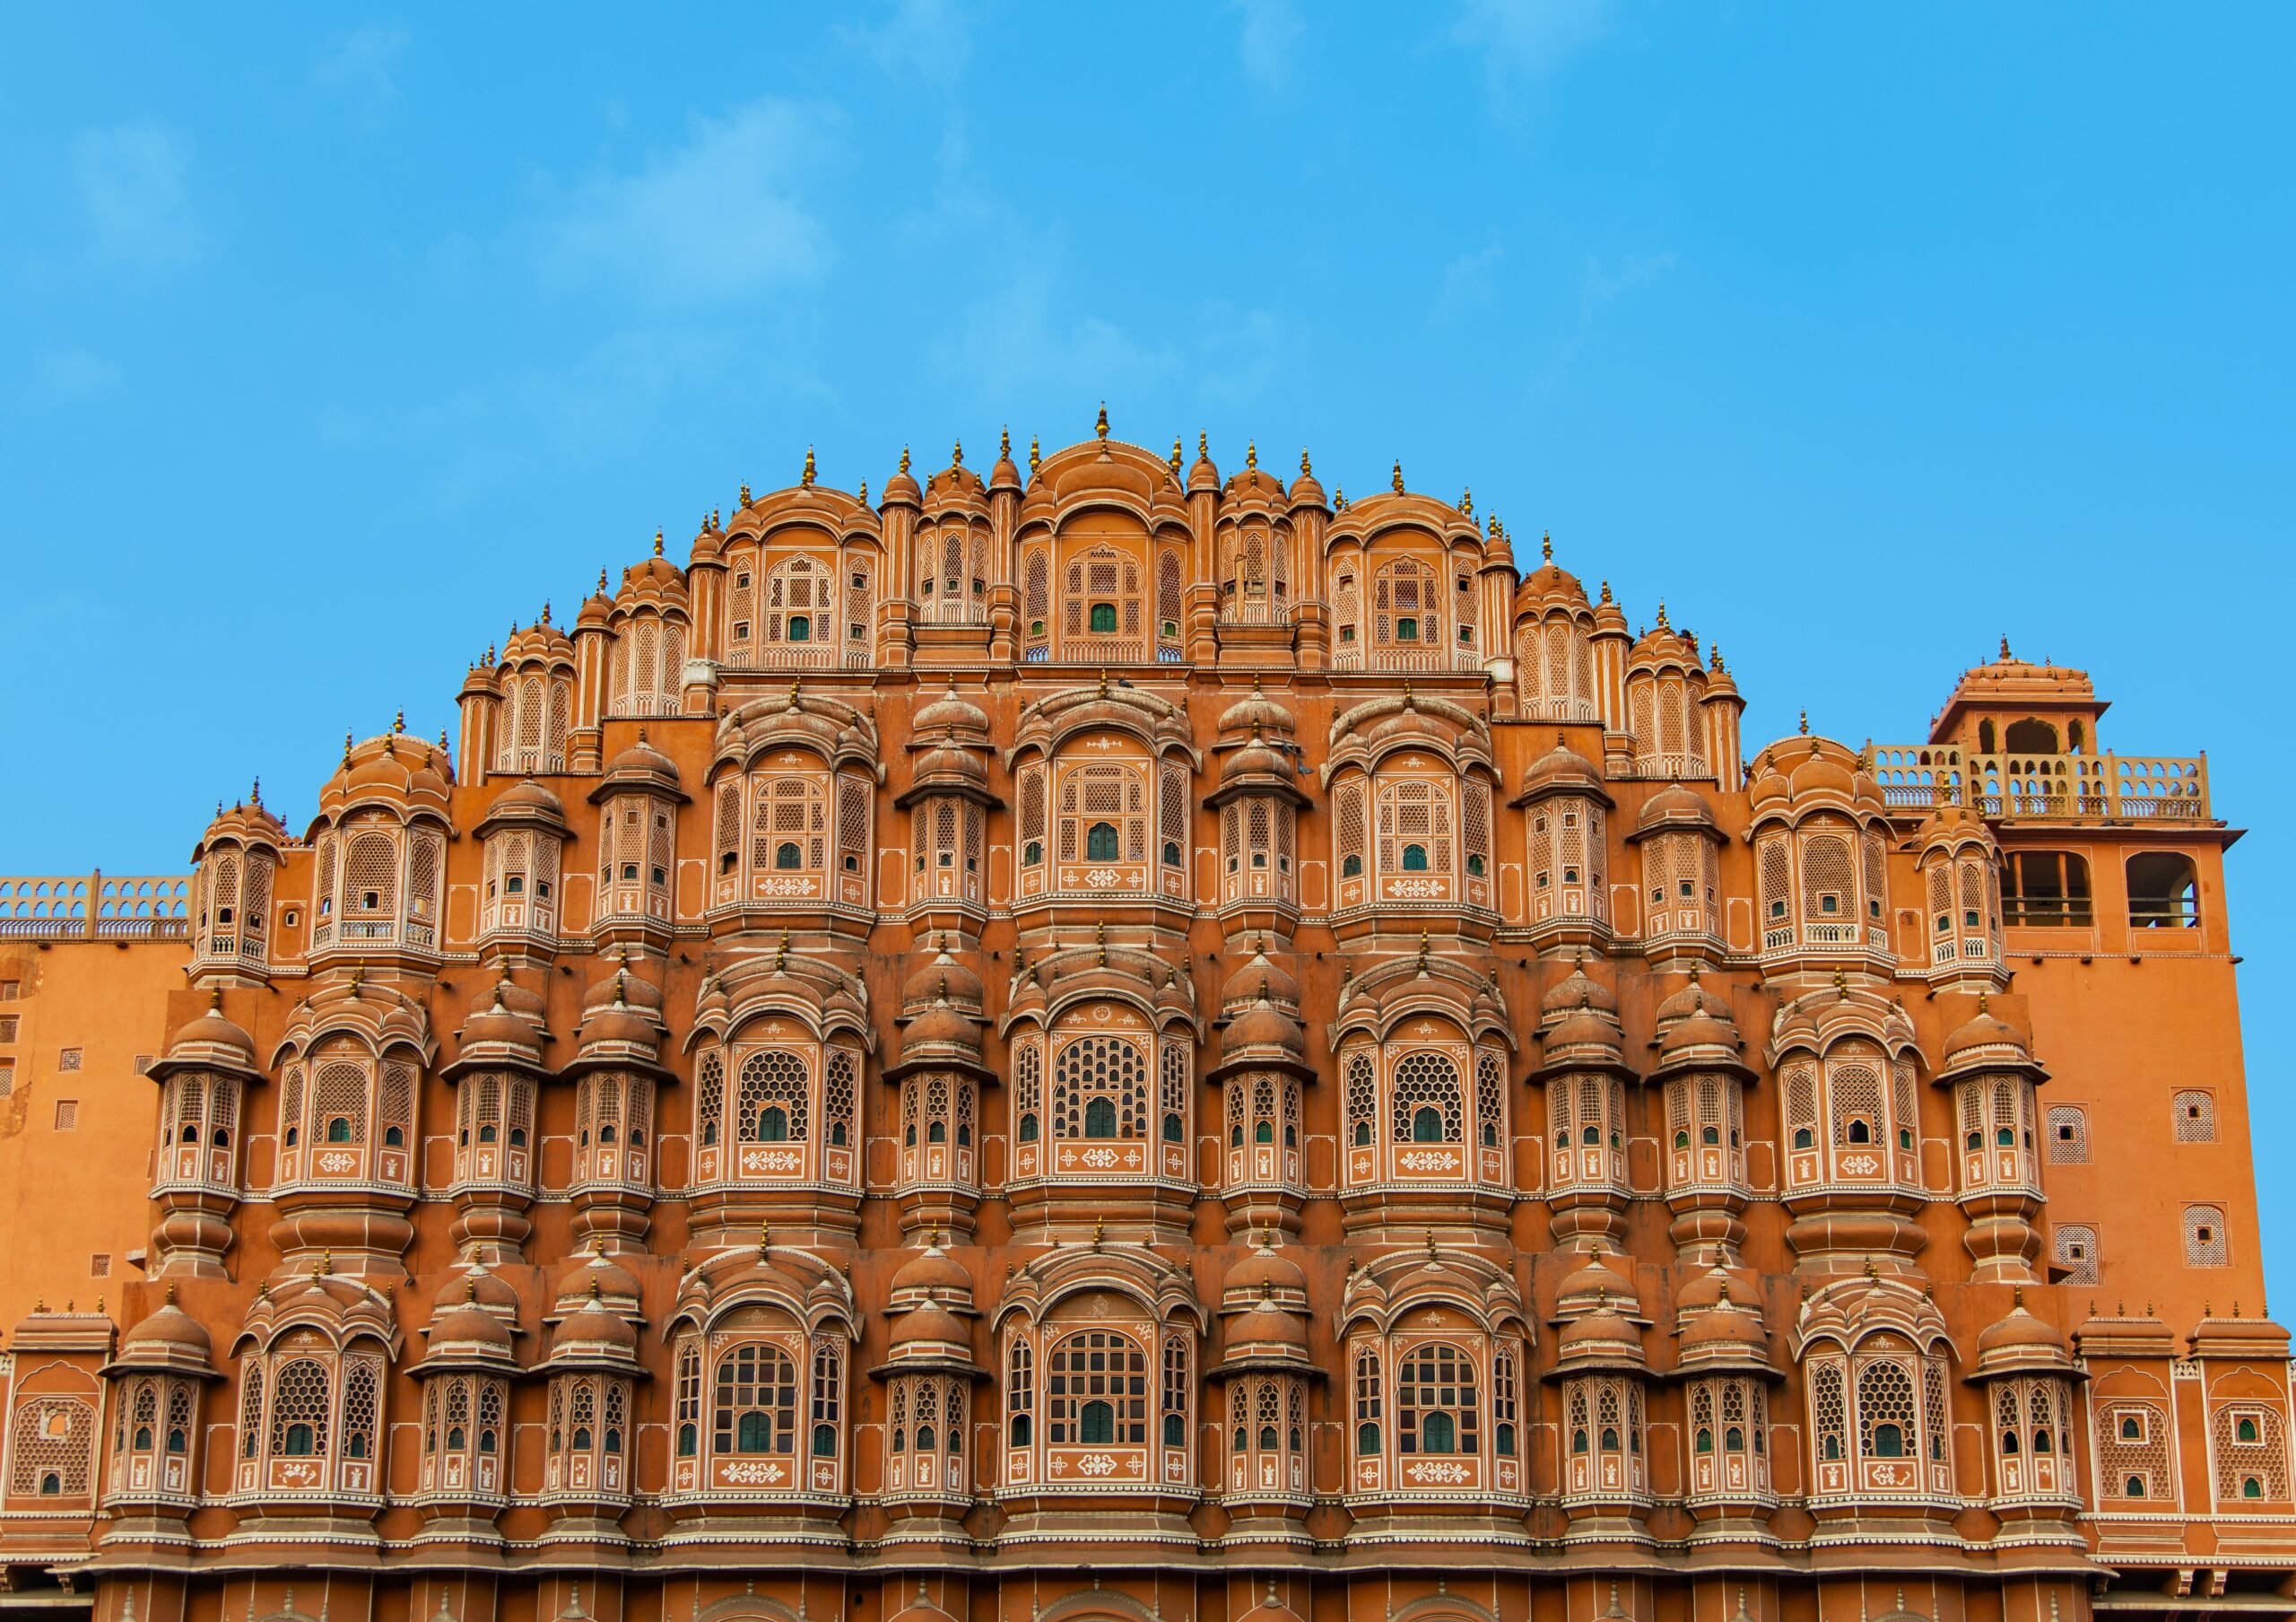 Picture of the front side of the Wind palace in Jaipur, India